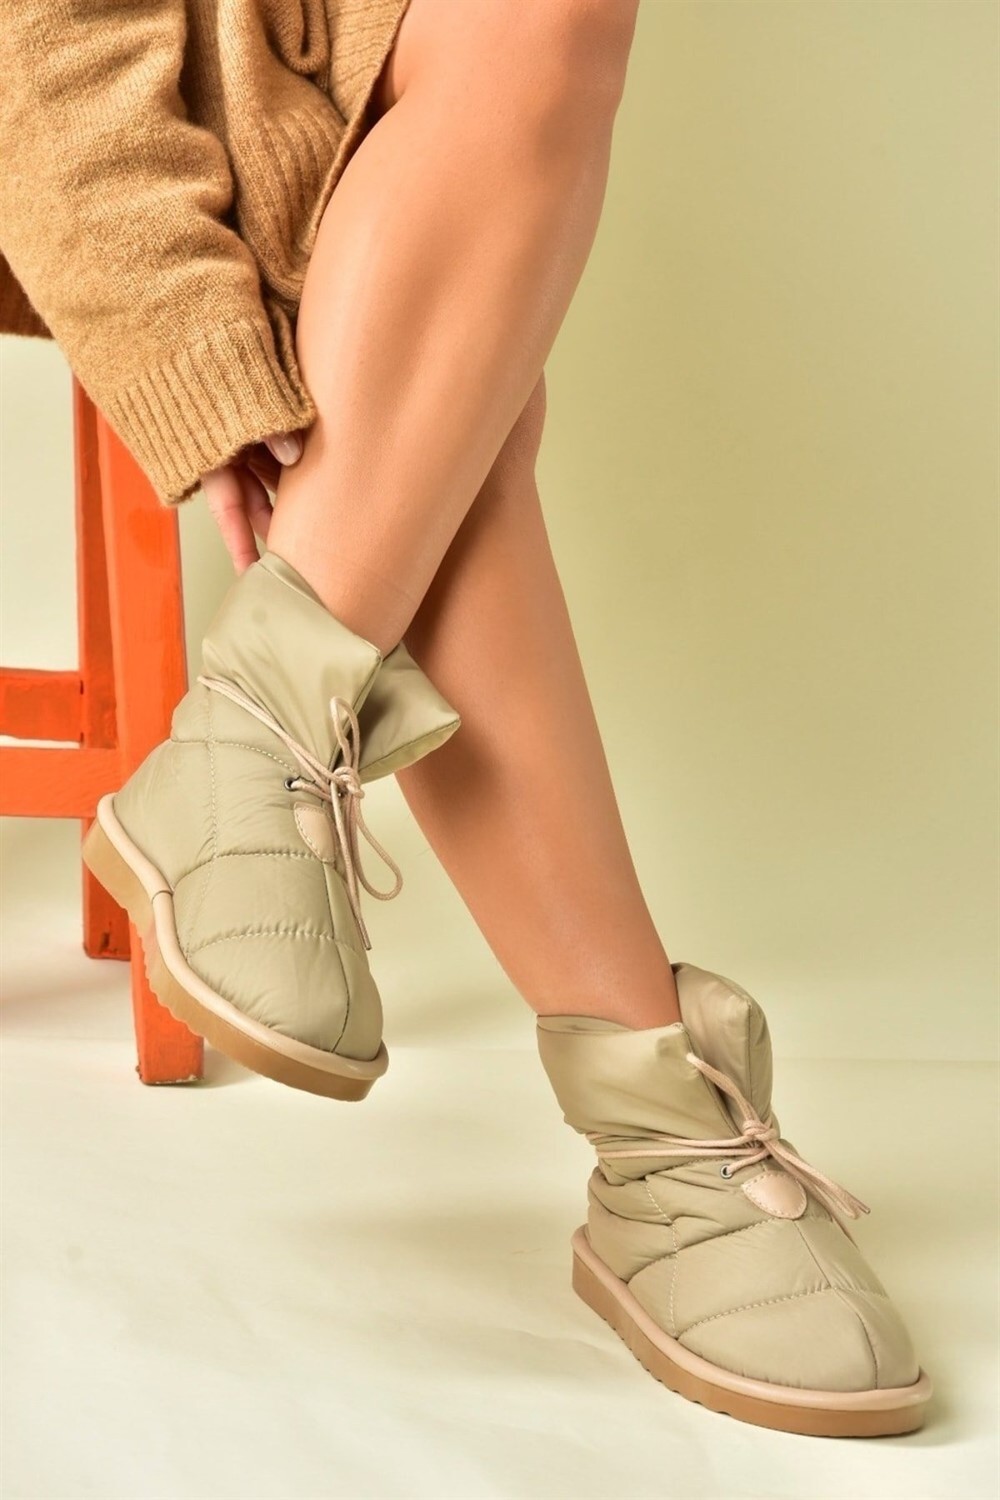 Fox Shoes Beige Fabric Women's Casual Boots